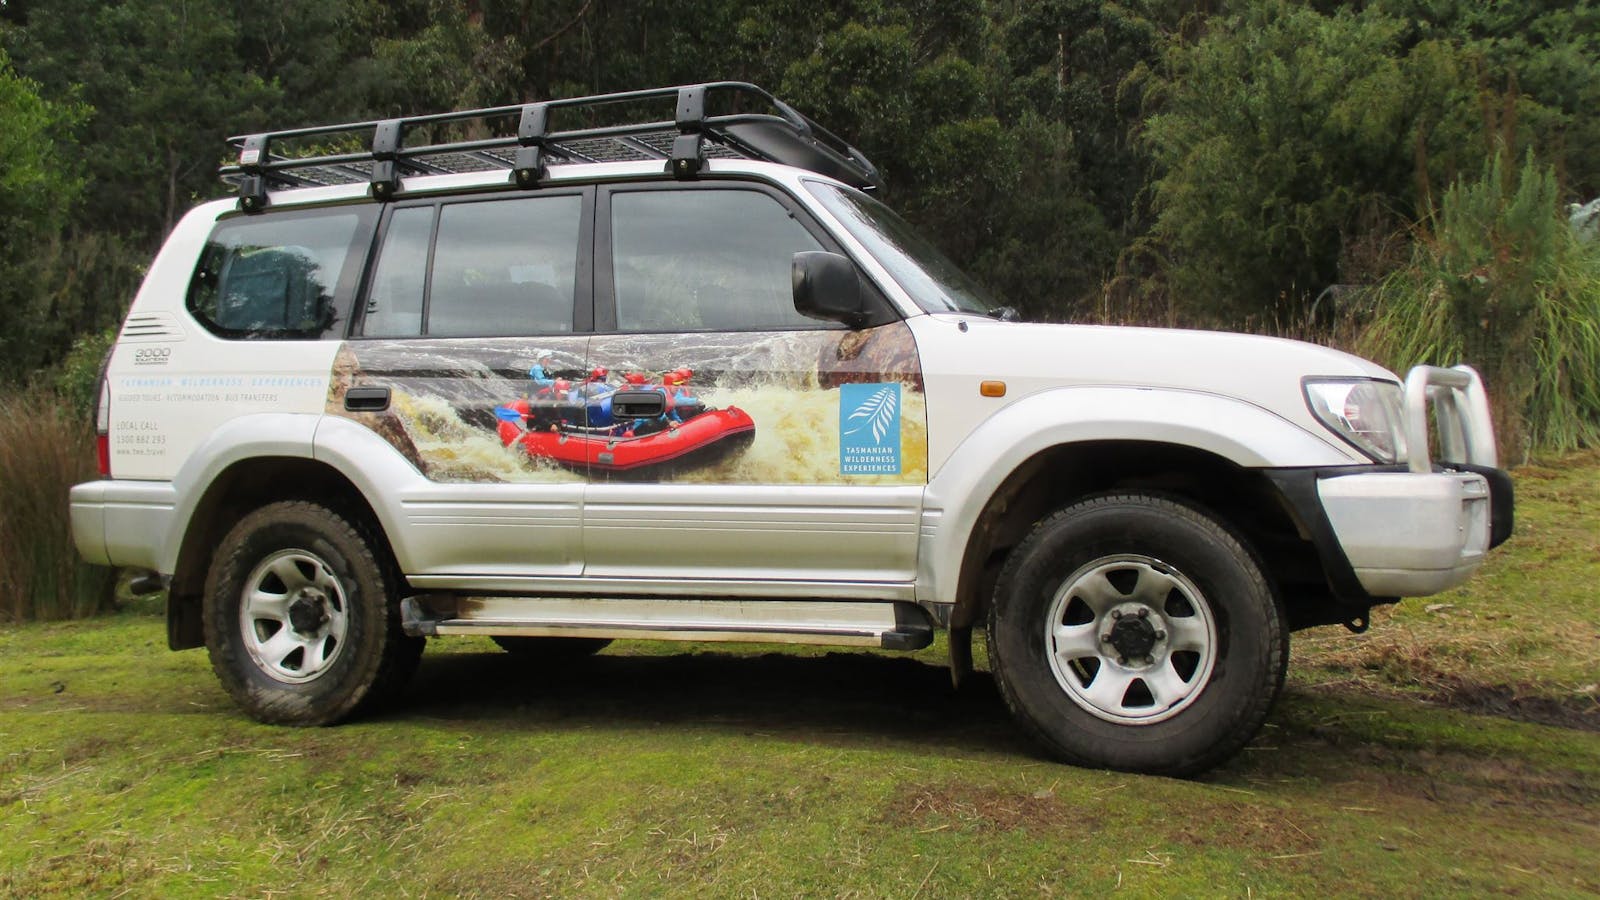 Tasmanian Wilderness Experience Transport and Tours